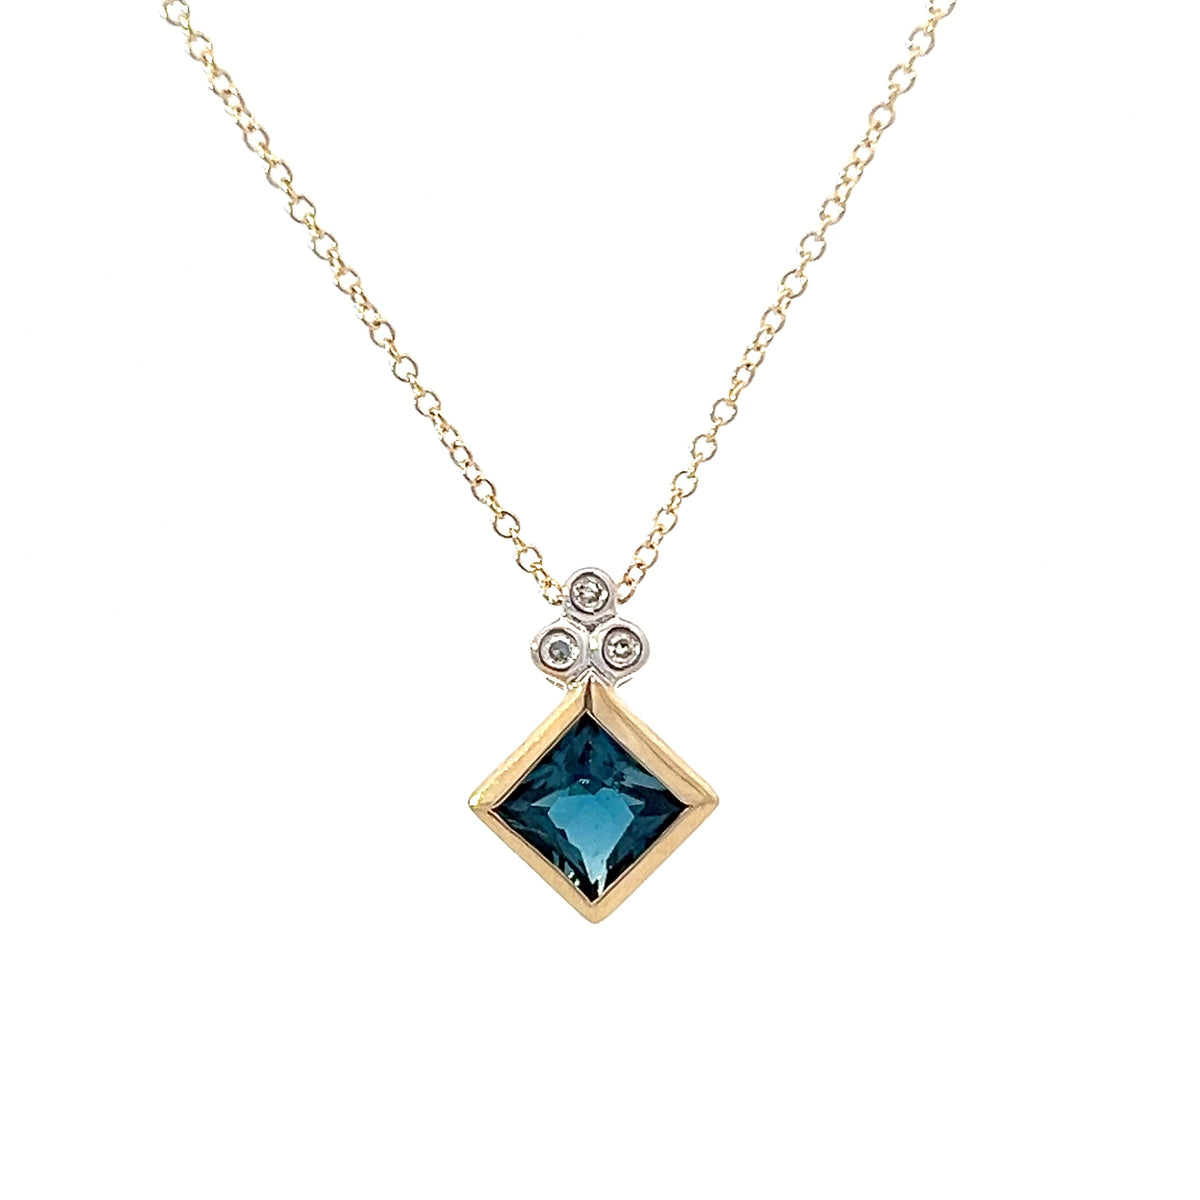 10K Yellow Gold London Blue Topaz and Diamond Necklace - 18 Inches